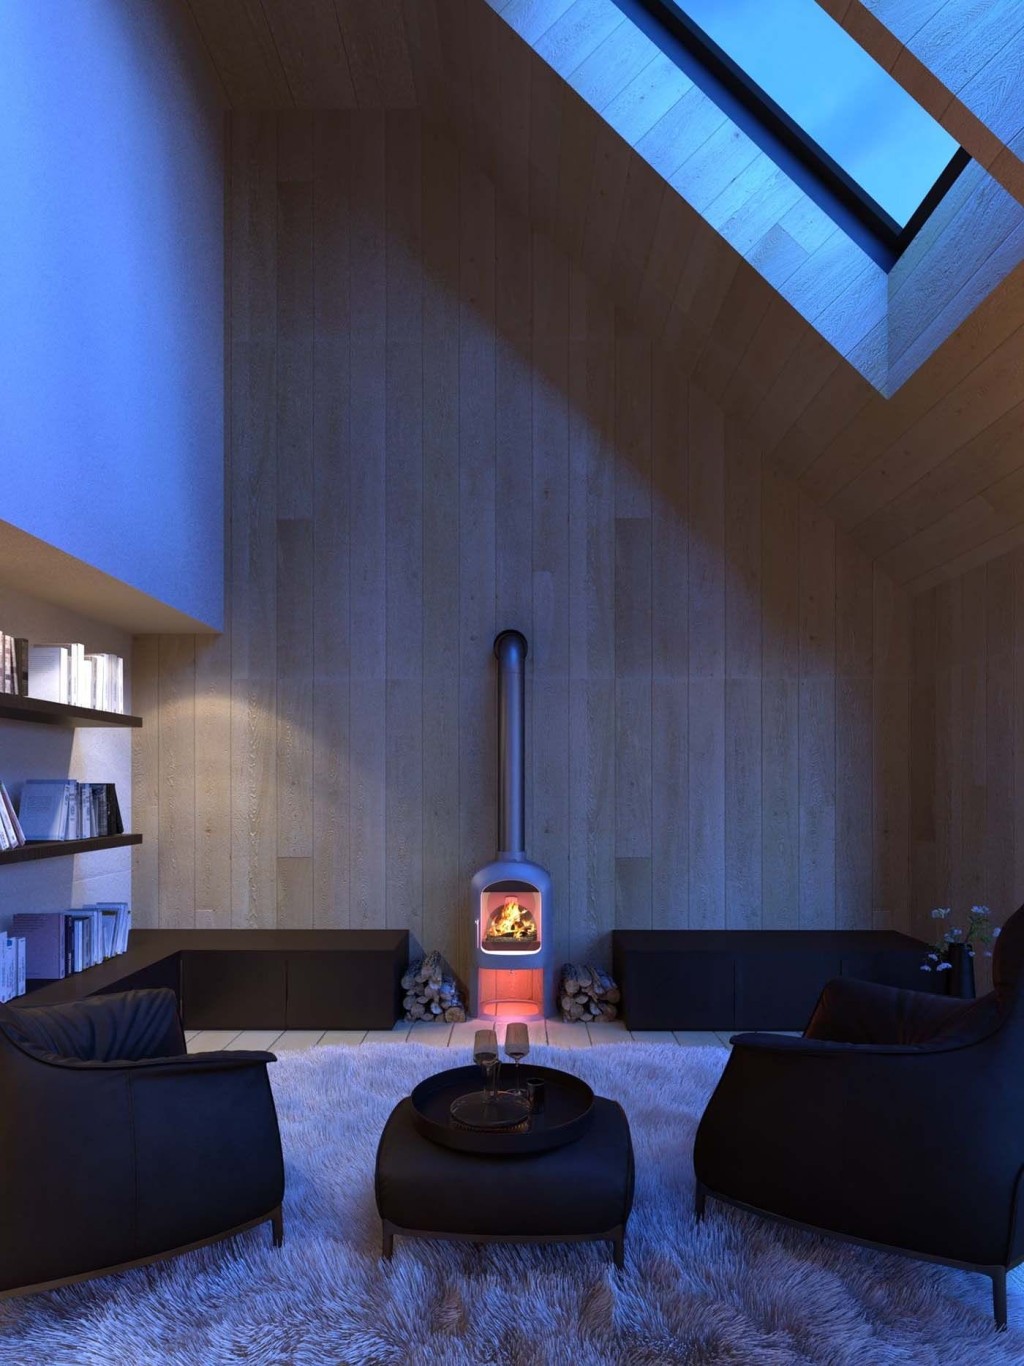 Cosy modern living space within a barn conversion, featuring a warm glowing wood stove, plush black sofas, and a skylight revealing the night sky, all atop a luxurious white shag rug, embodying sophisticated rural living.